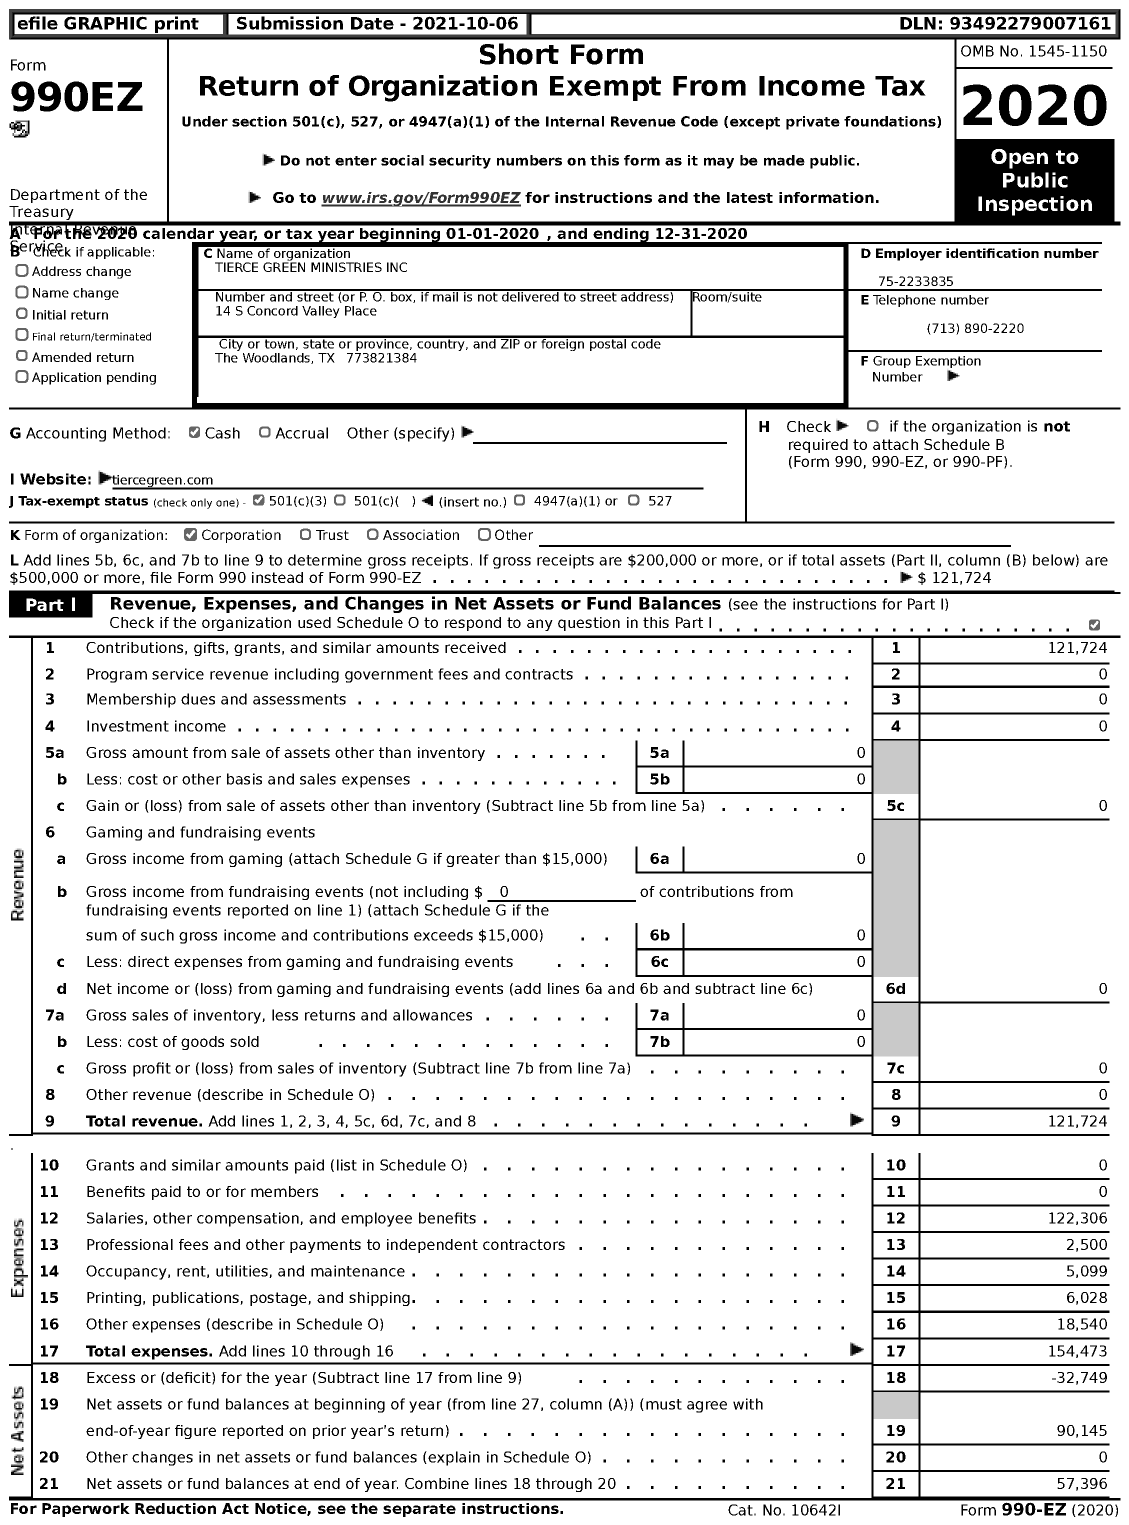 Image of first page of 2020 Form 990EZ for Tierce Green Ministries